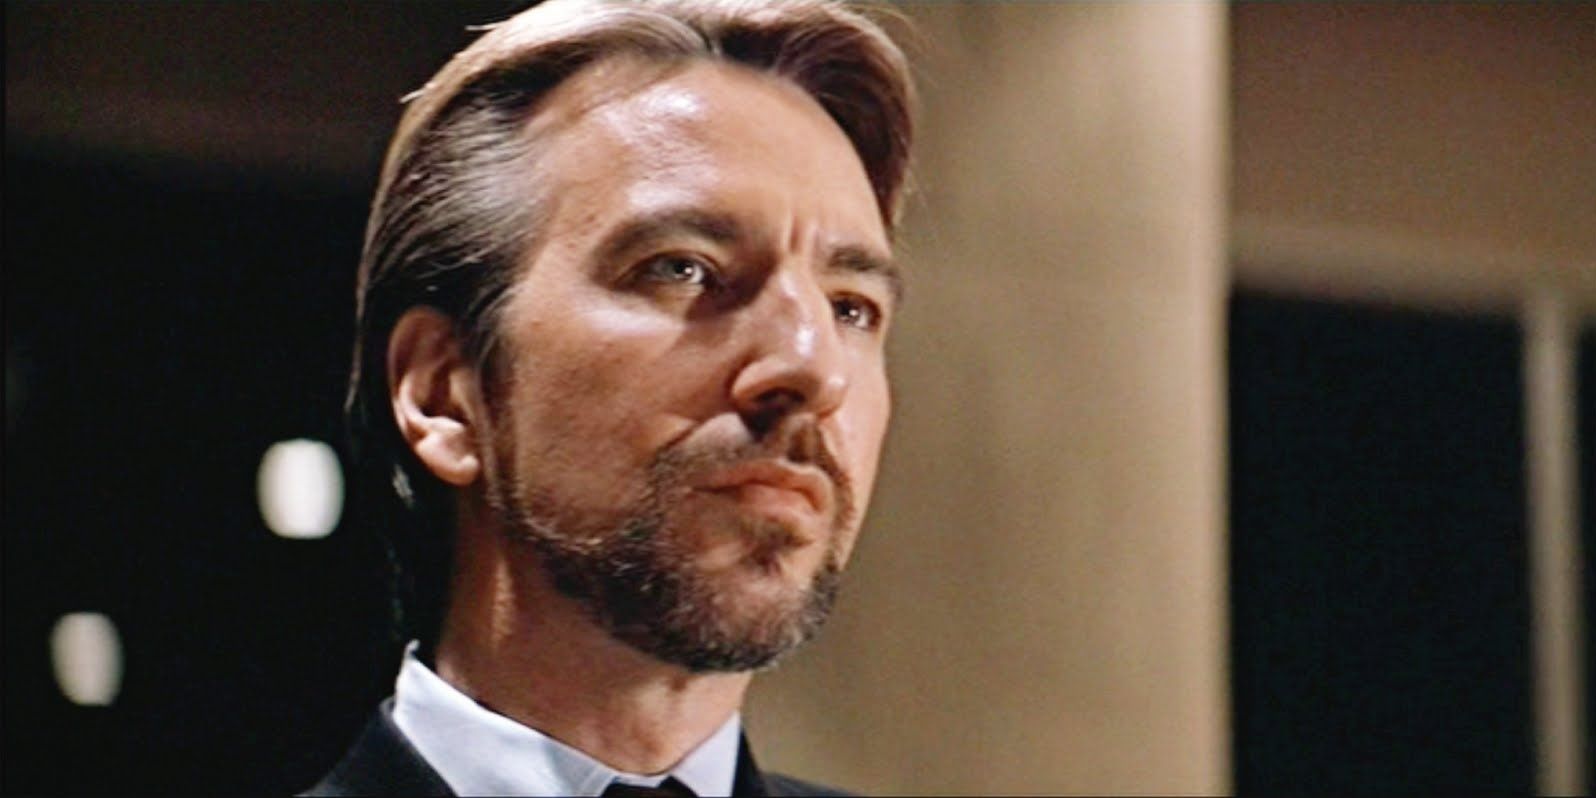 Alan Rickman as Hans Gruber with a serious expression as he looks at someone off camera in Die Hard